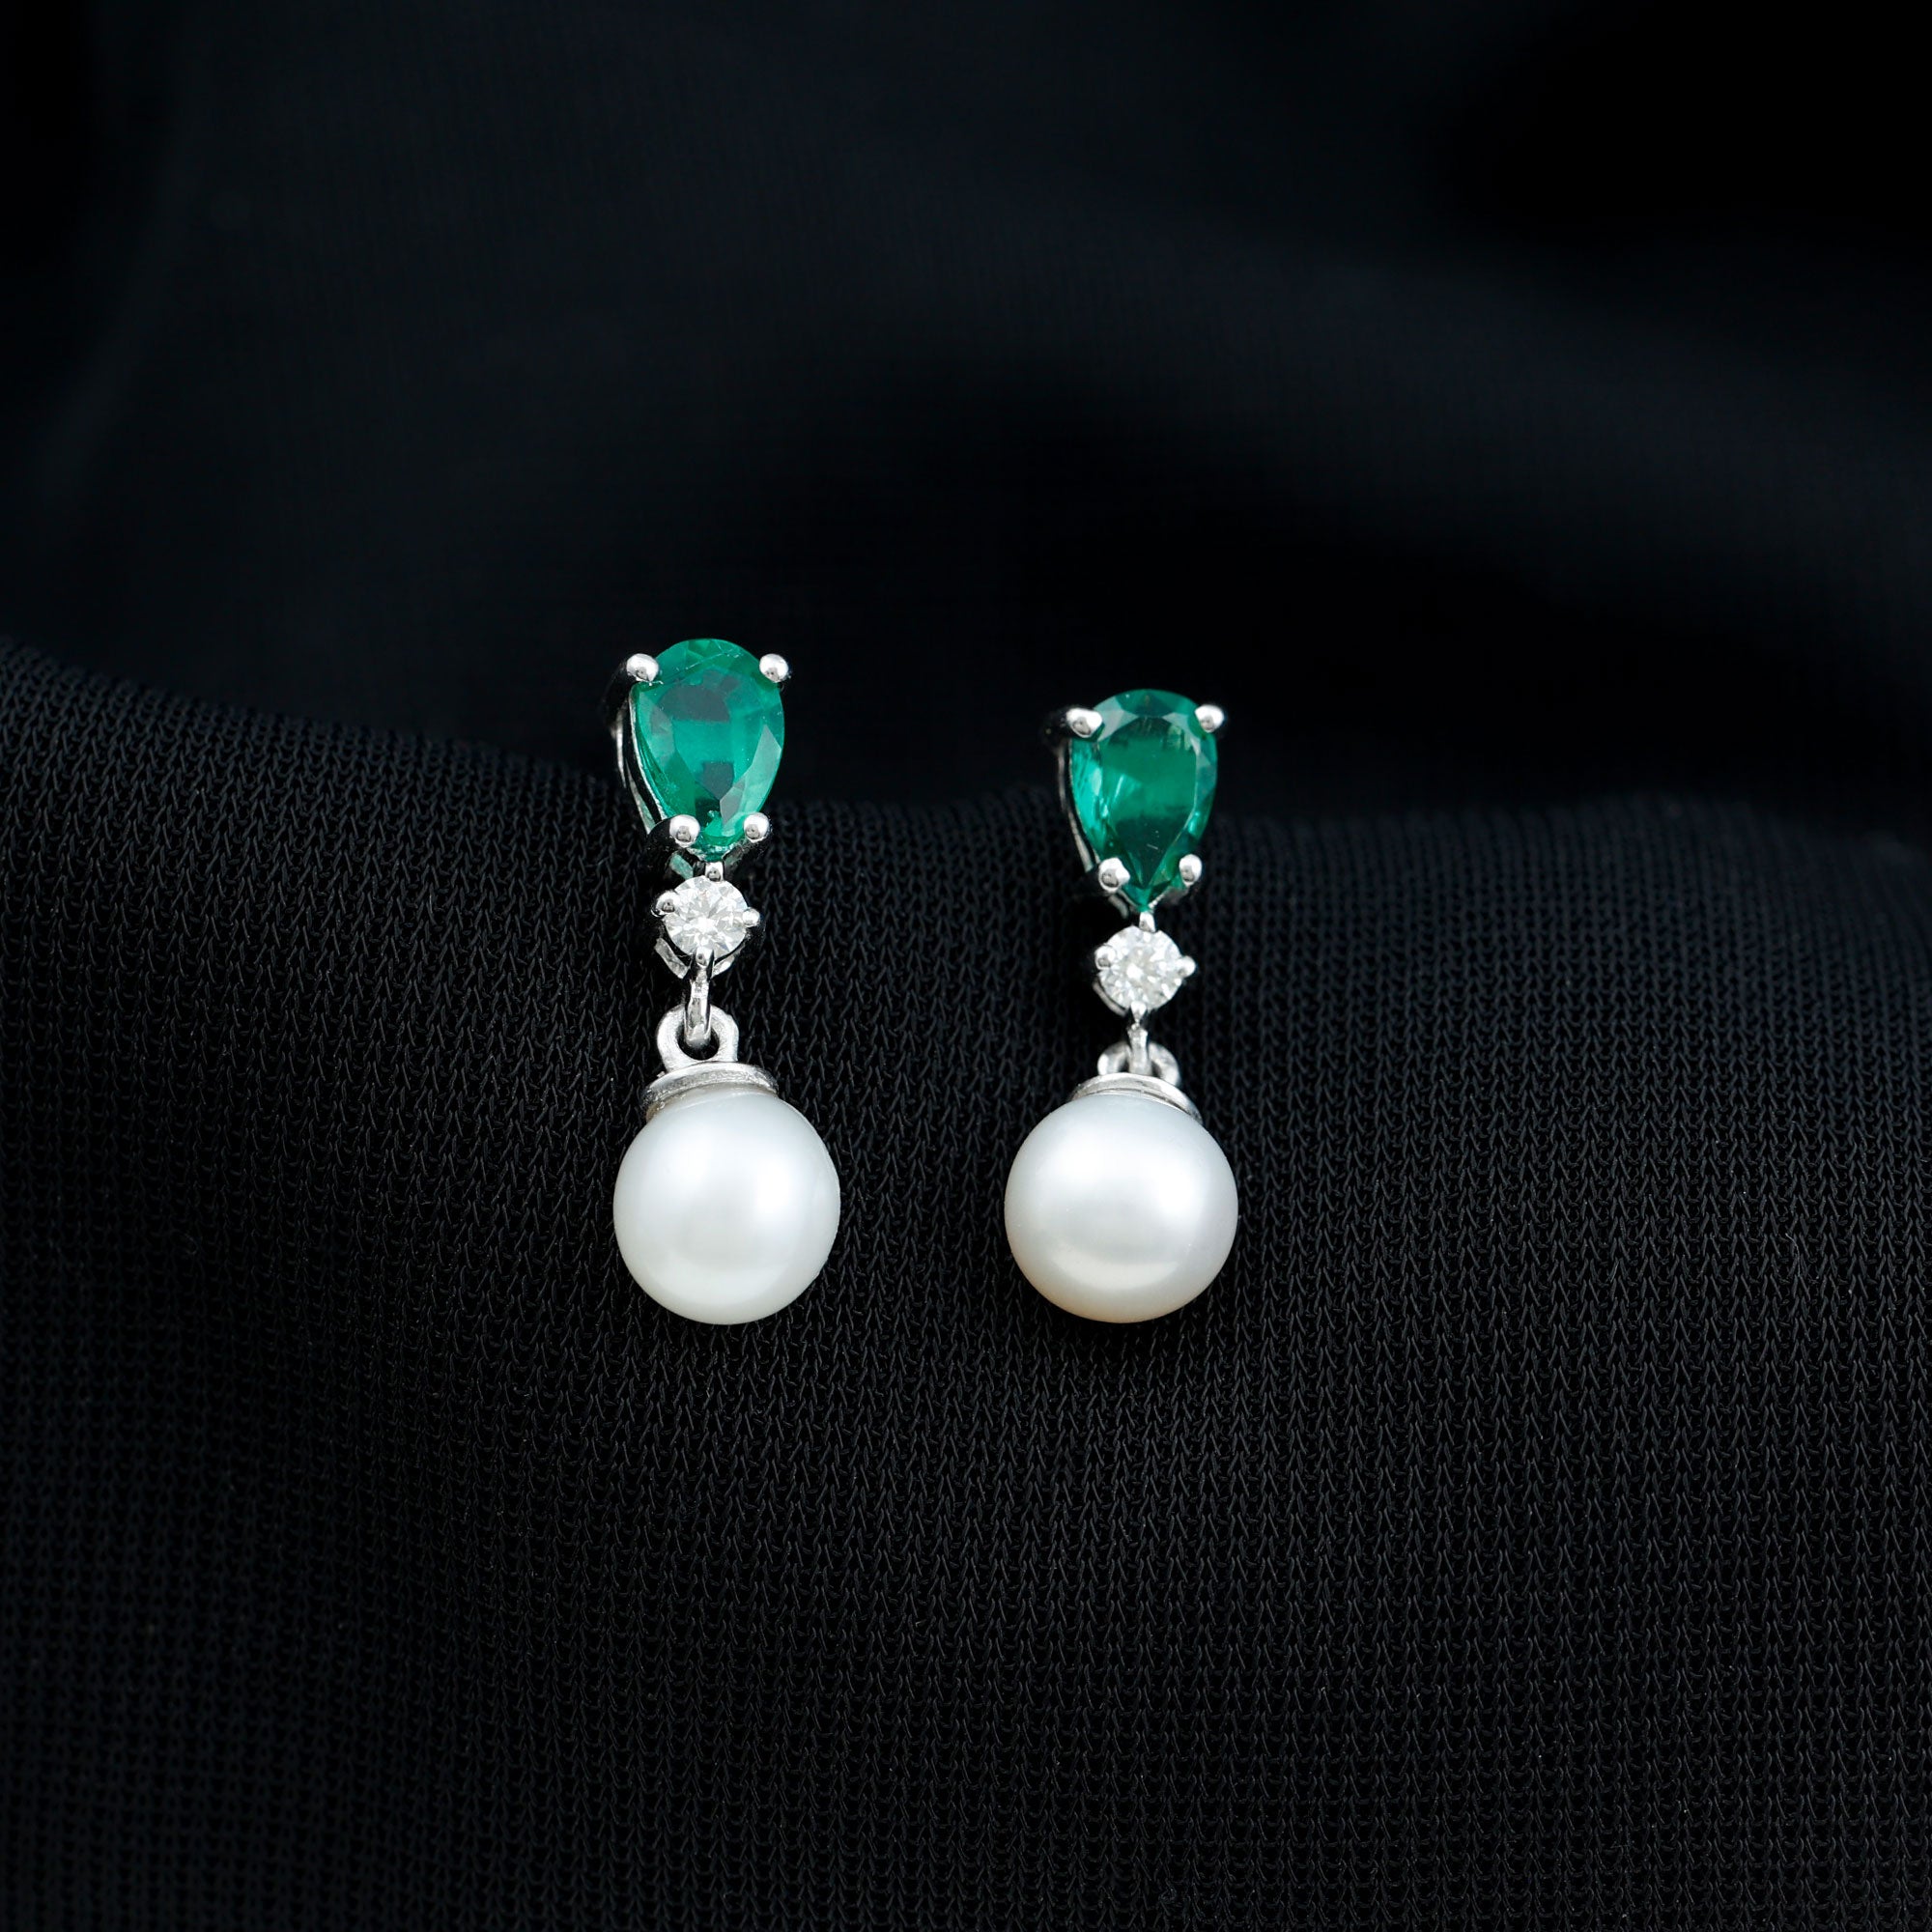 3.75 CT Created Emerald and Moissanite Silver Dangle Earrings with Freshwater Pearl Drop - Rosec Jewels